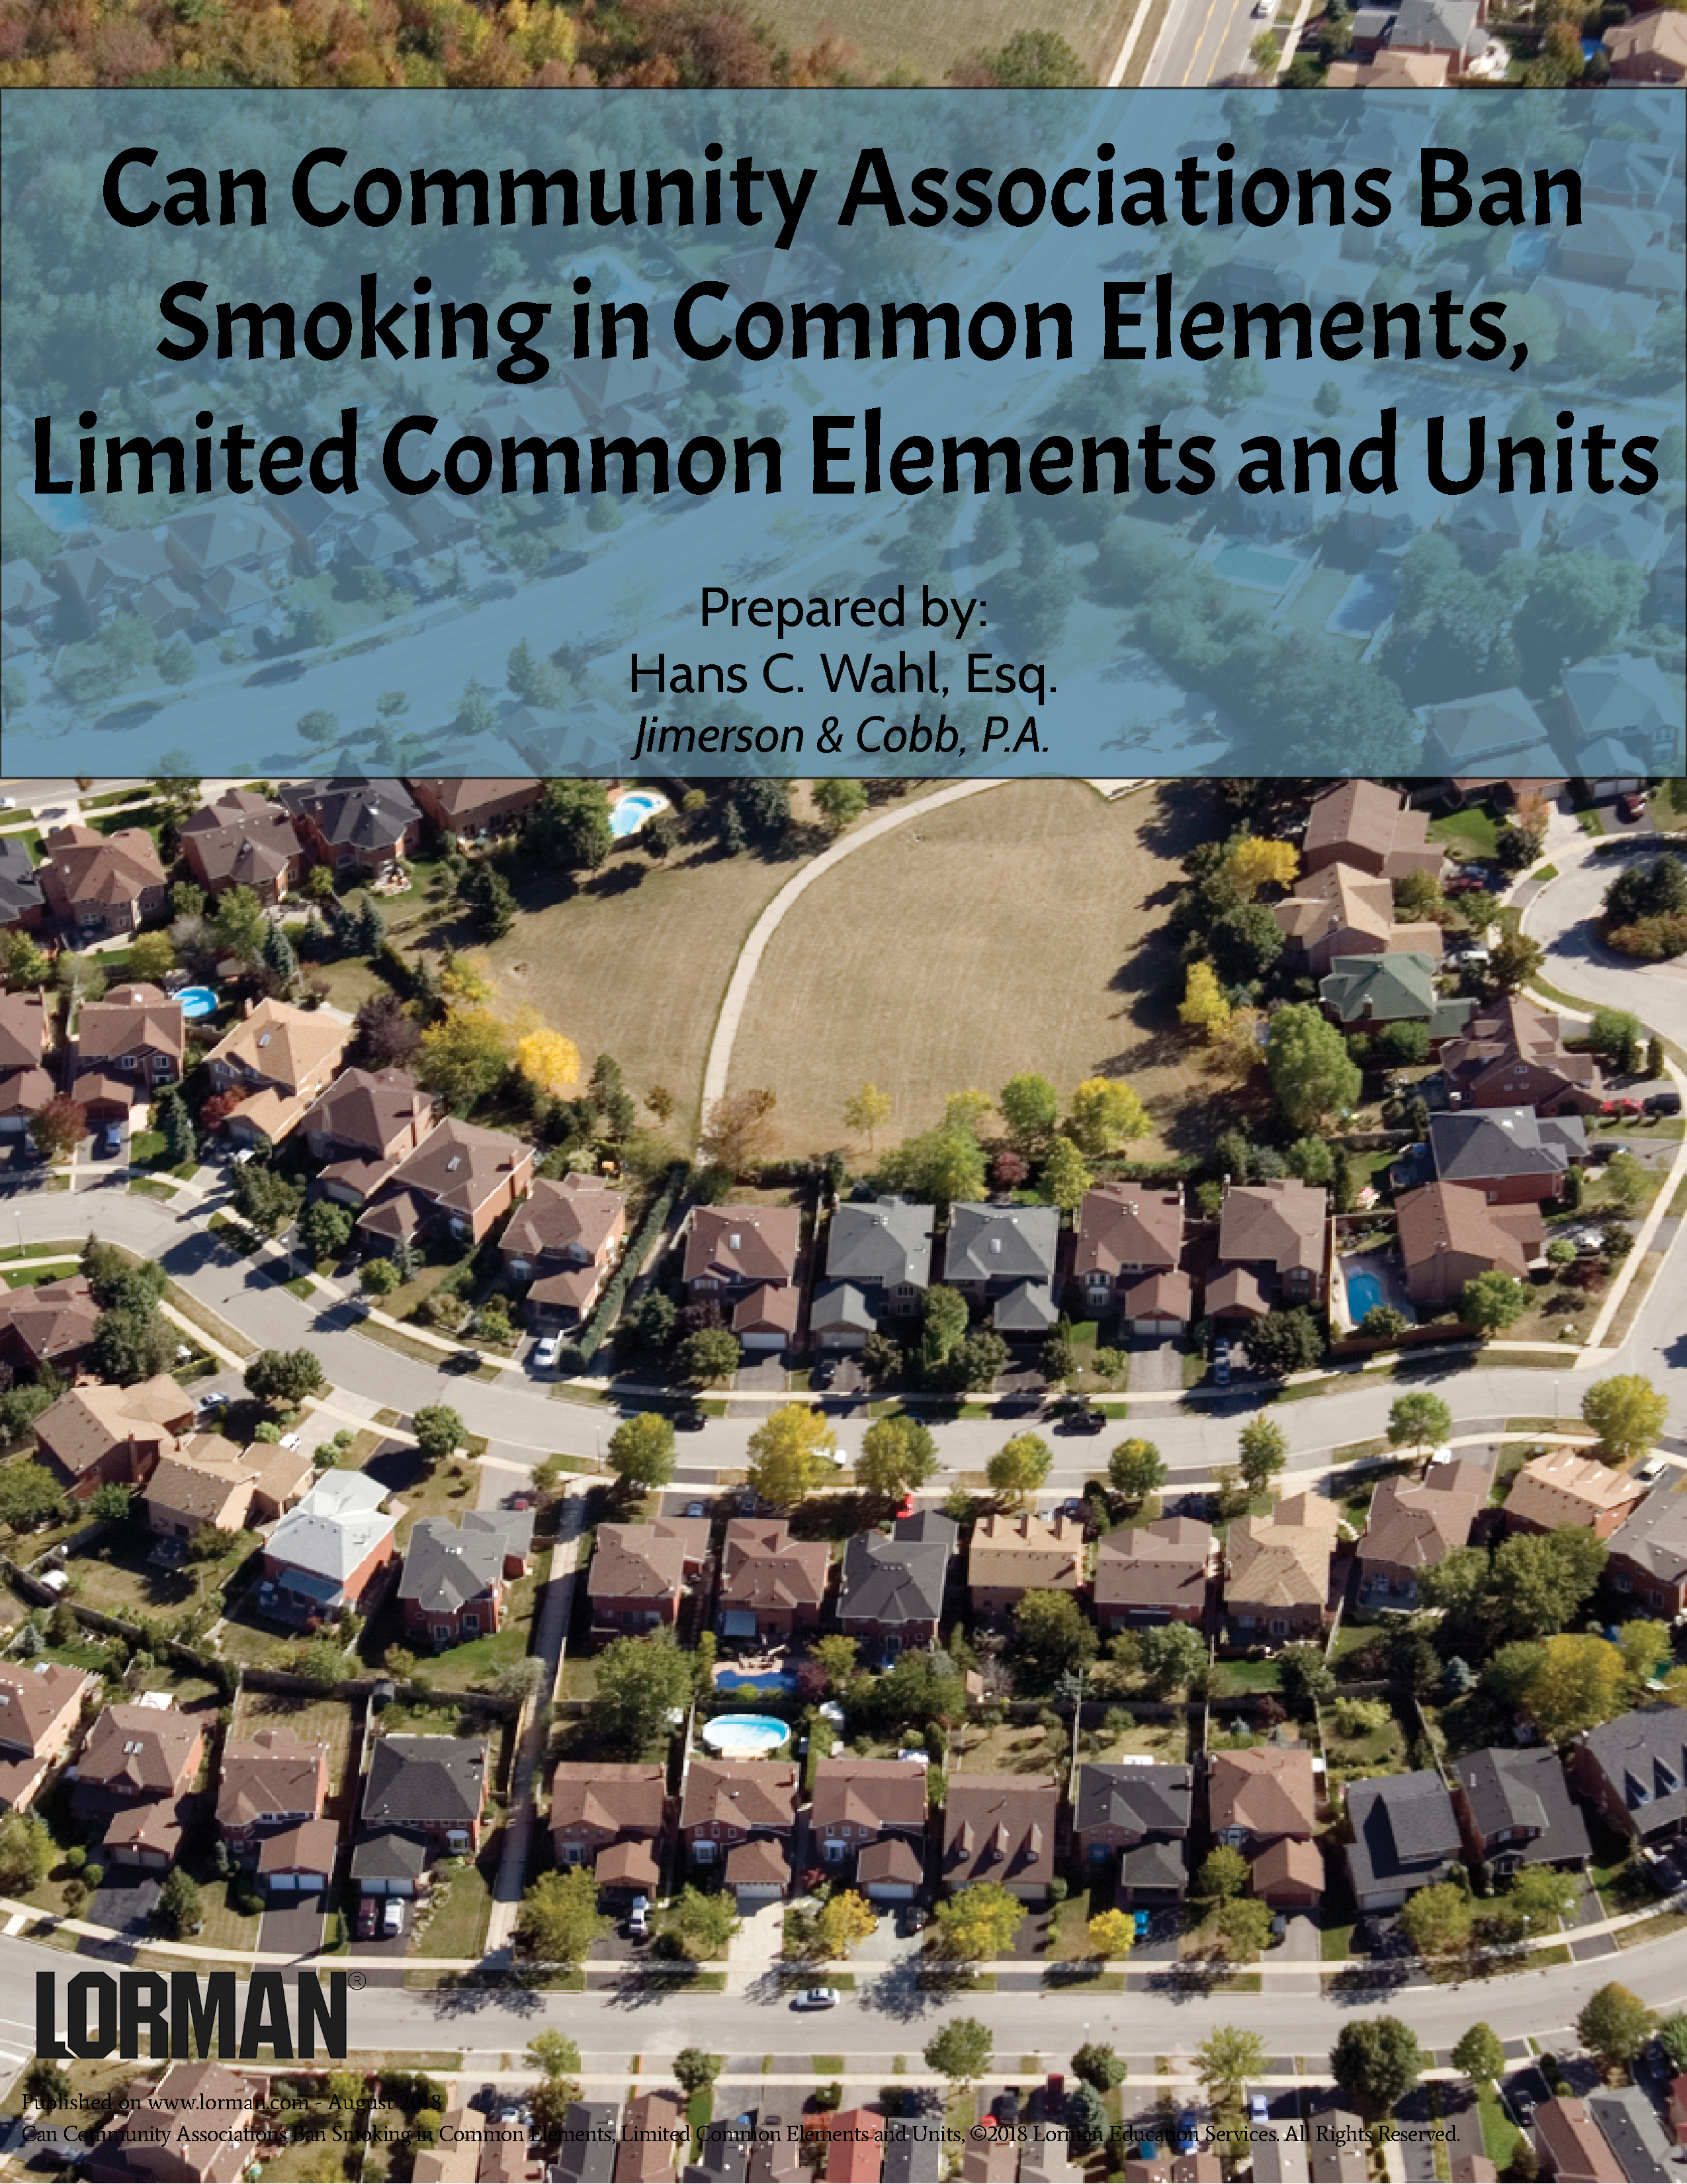 Can Community Associations Ban Smoking in Common Elements, Limited Common Elements and Units?